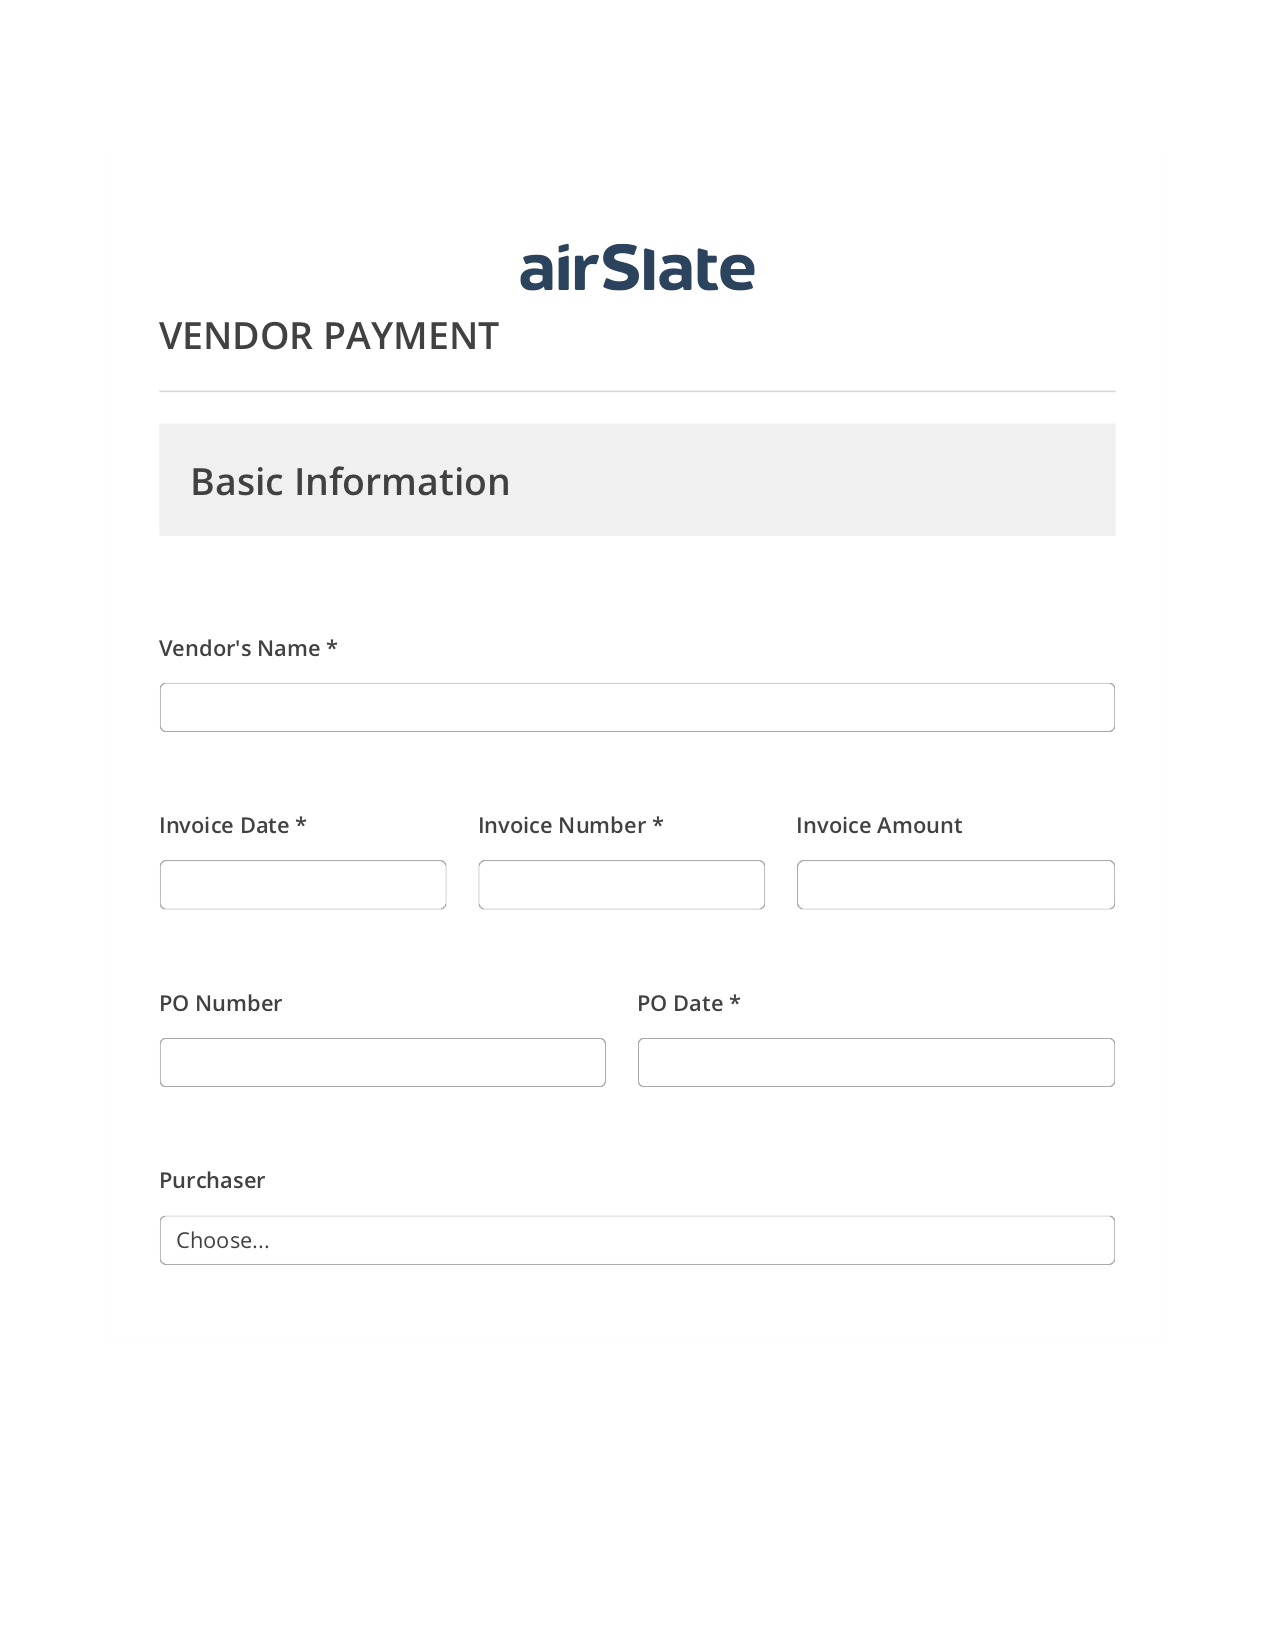 Vendor Payment Flow Add Tags to Slate Bot